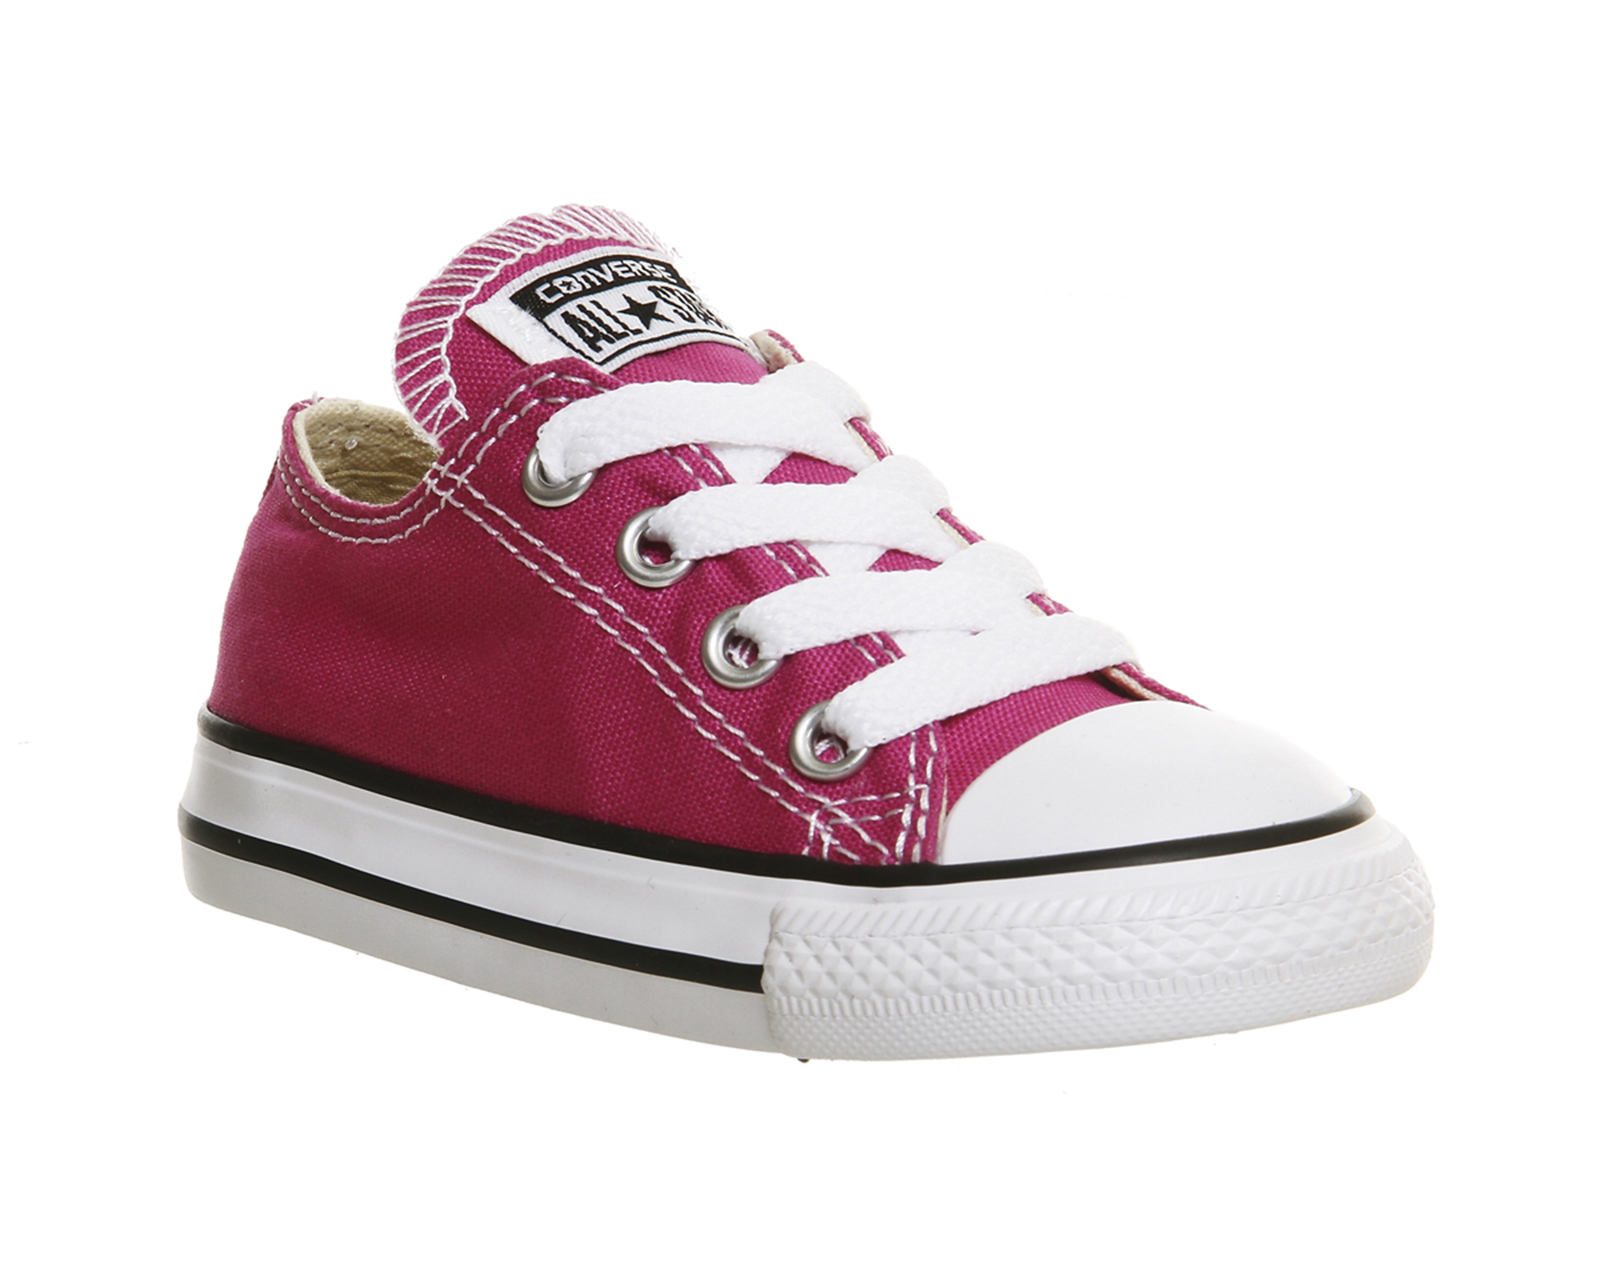 cheap infant converse, OFF 73%,Buy!